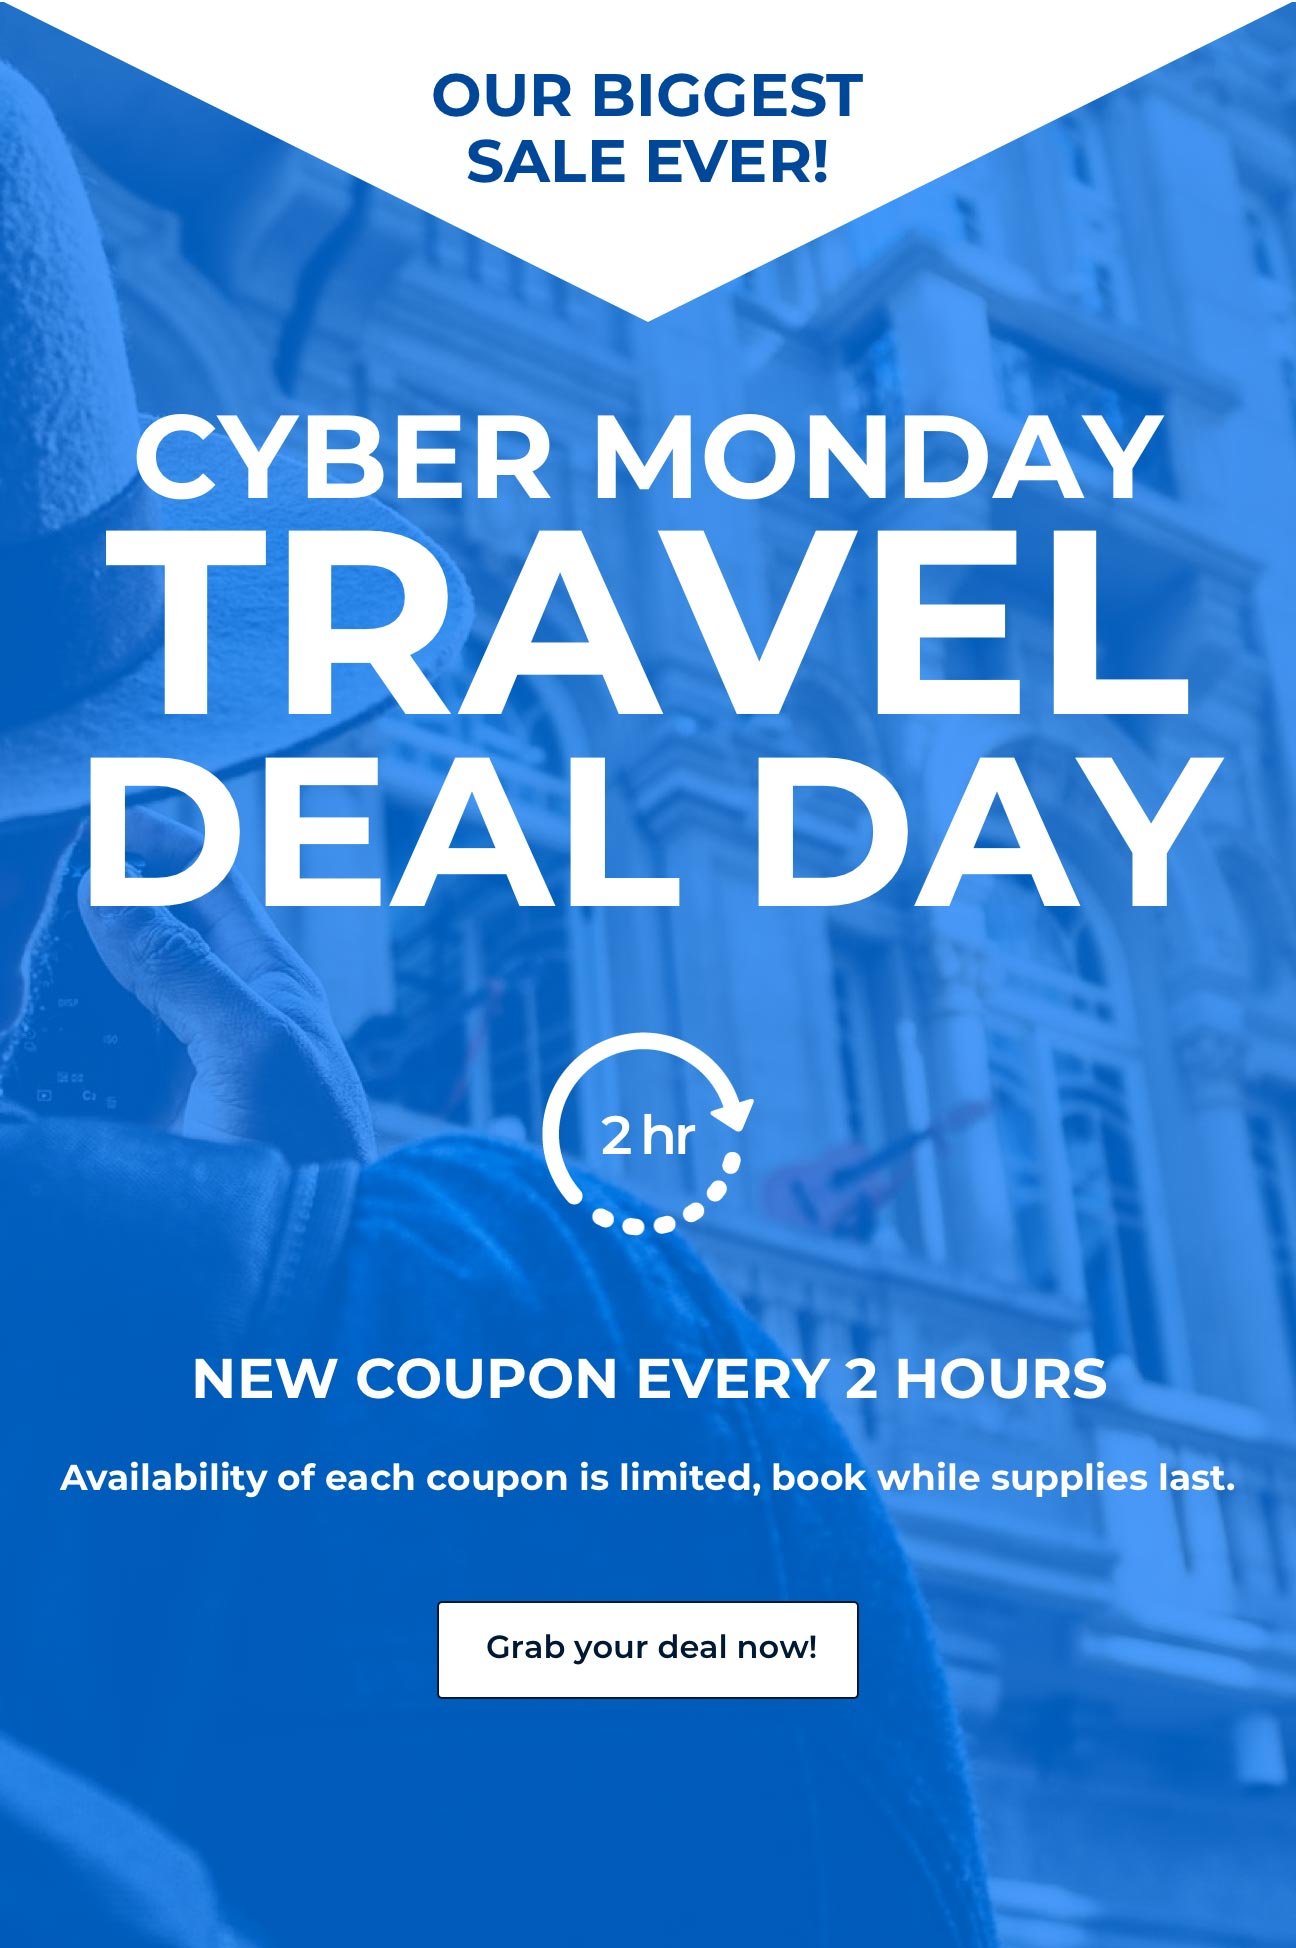 Priceline Cyber Monday Travel Deals New Sale Every 2 Hours Milled